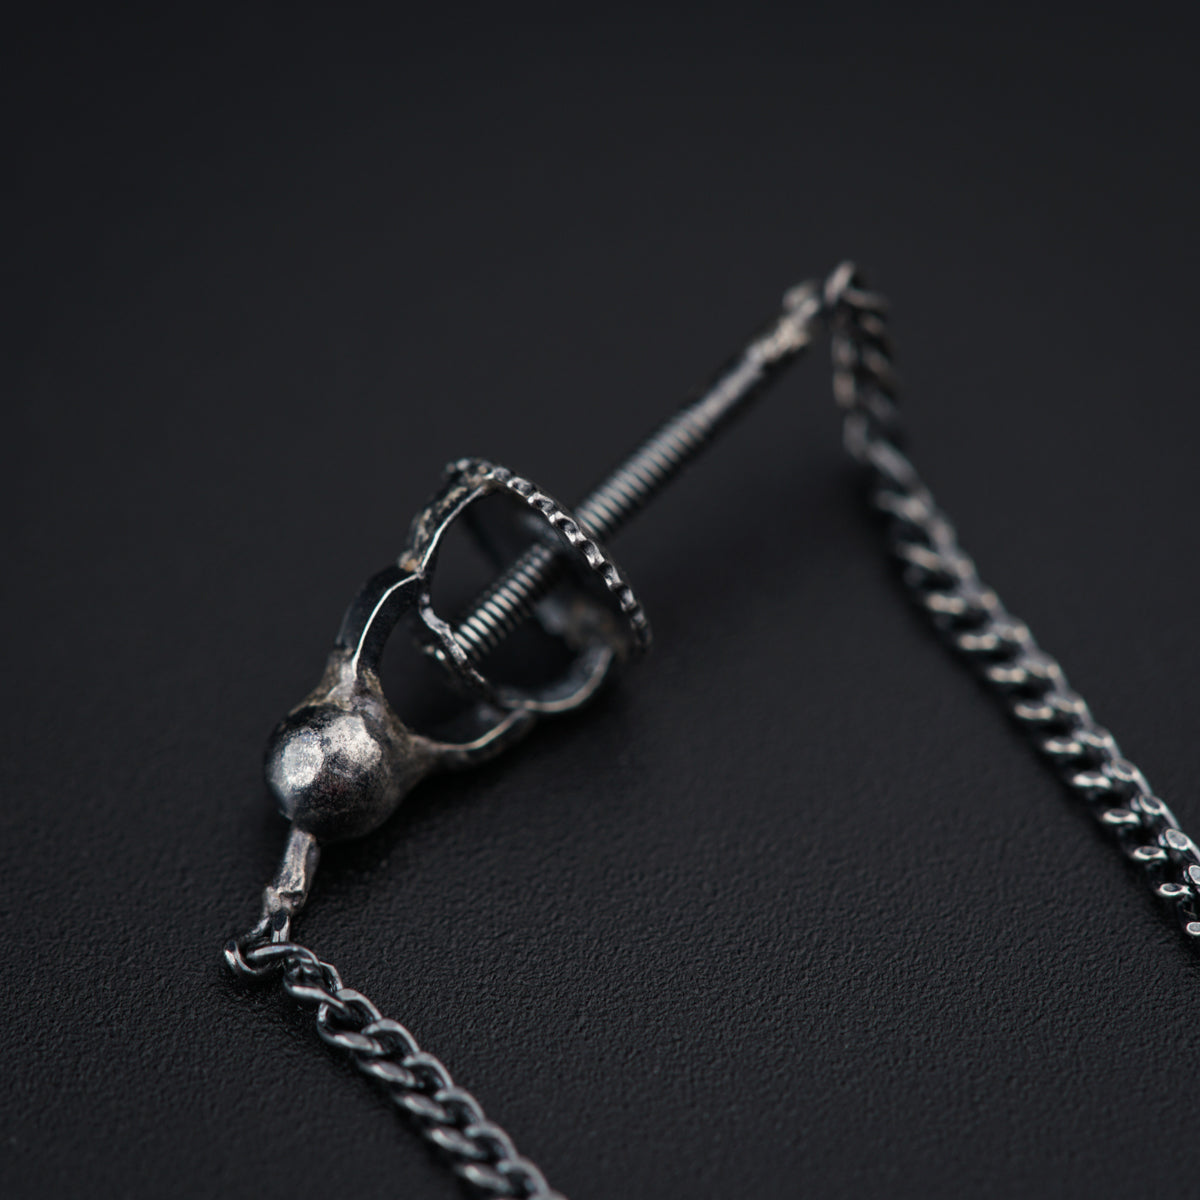 a metal object with a chain attached to it